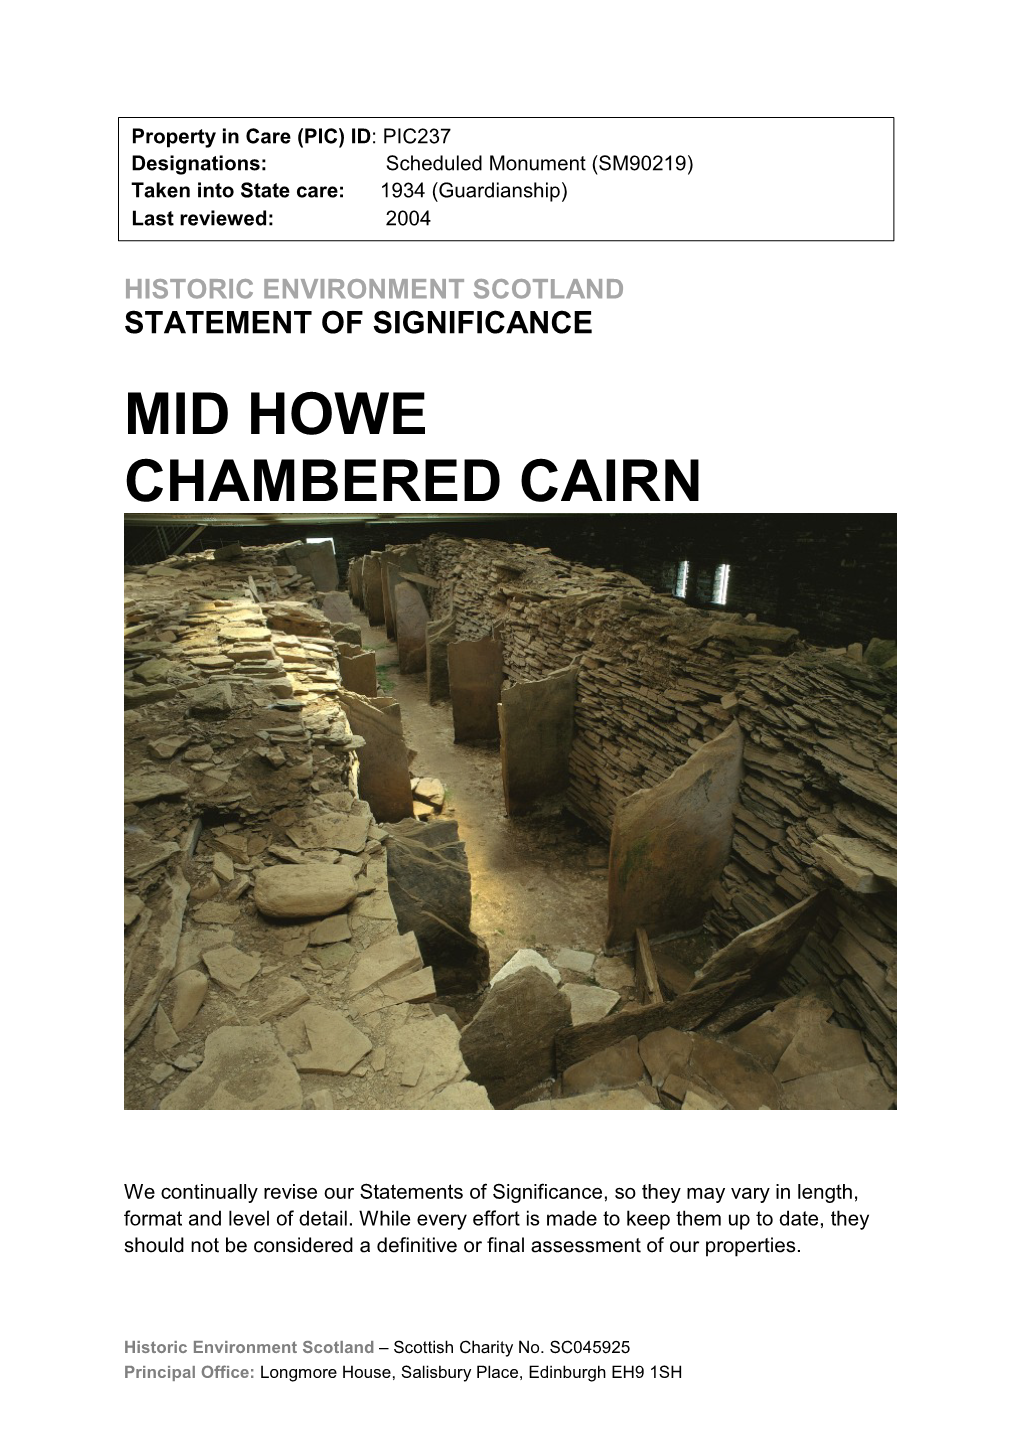 Mid Howe Chambered Cairn